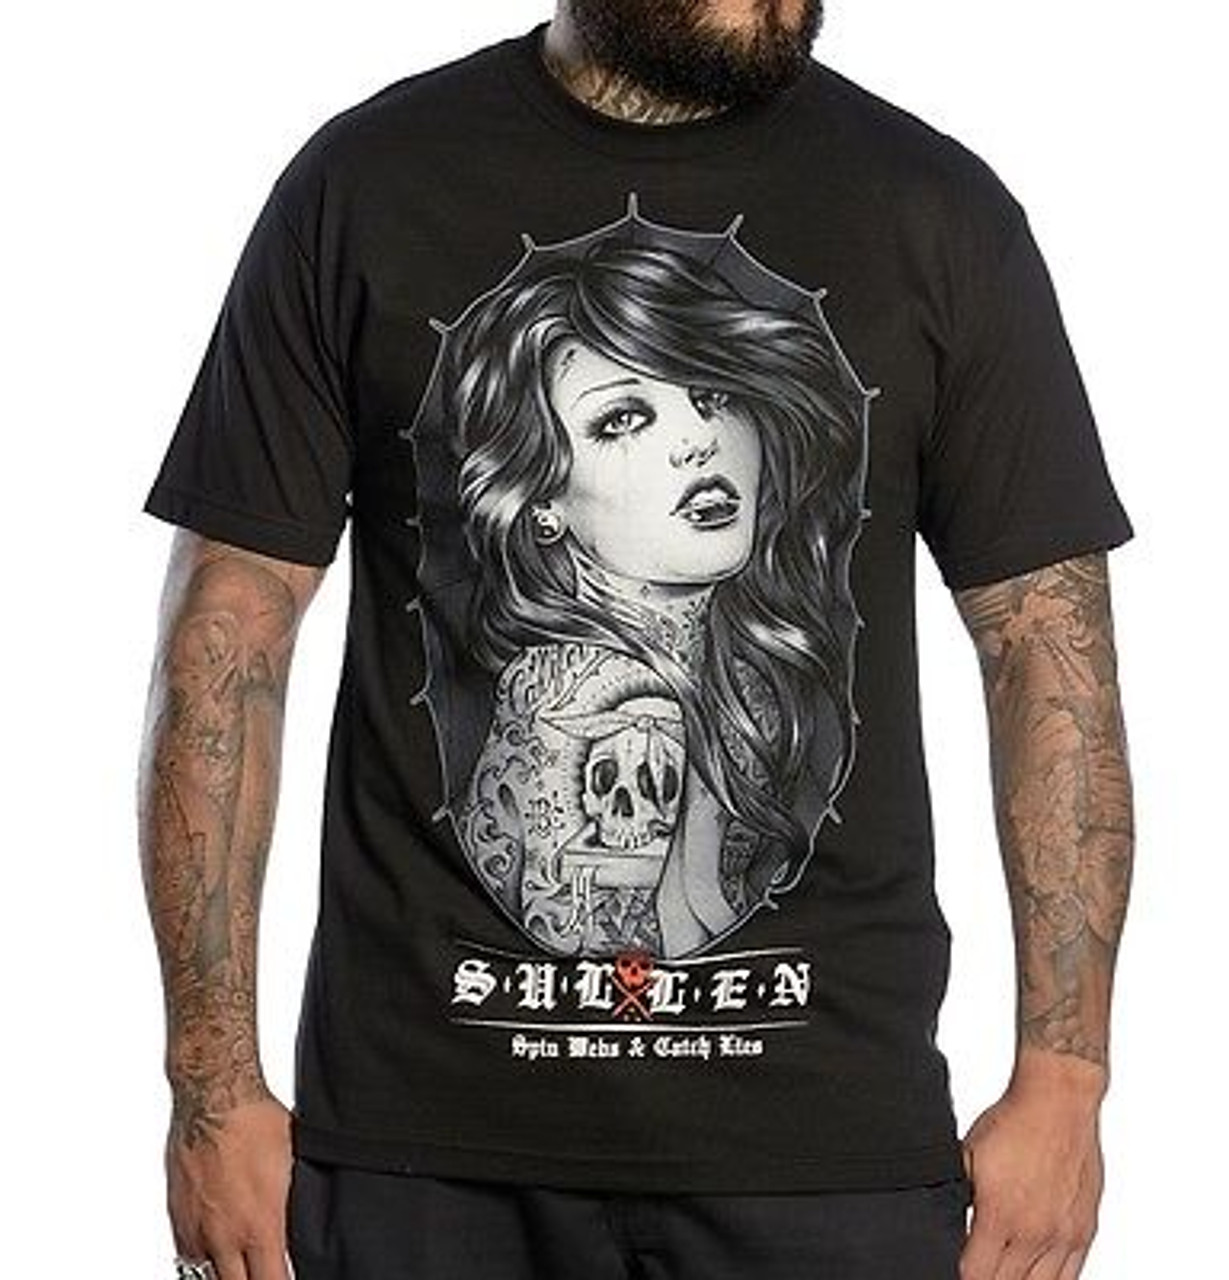 CLOTHING SPINNING WEBS PIN UP GIRL TATTOO GOTH INK BLK T SHIRT S-5XL - Fearless Apparel